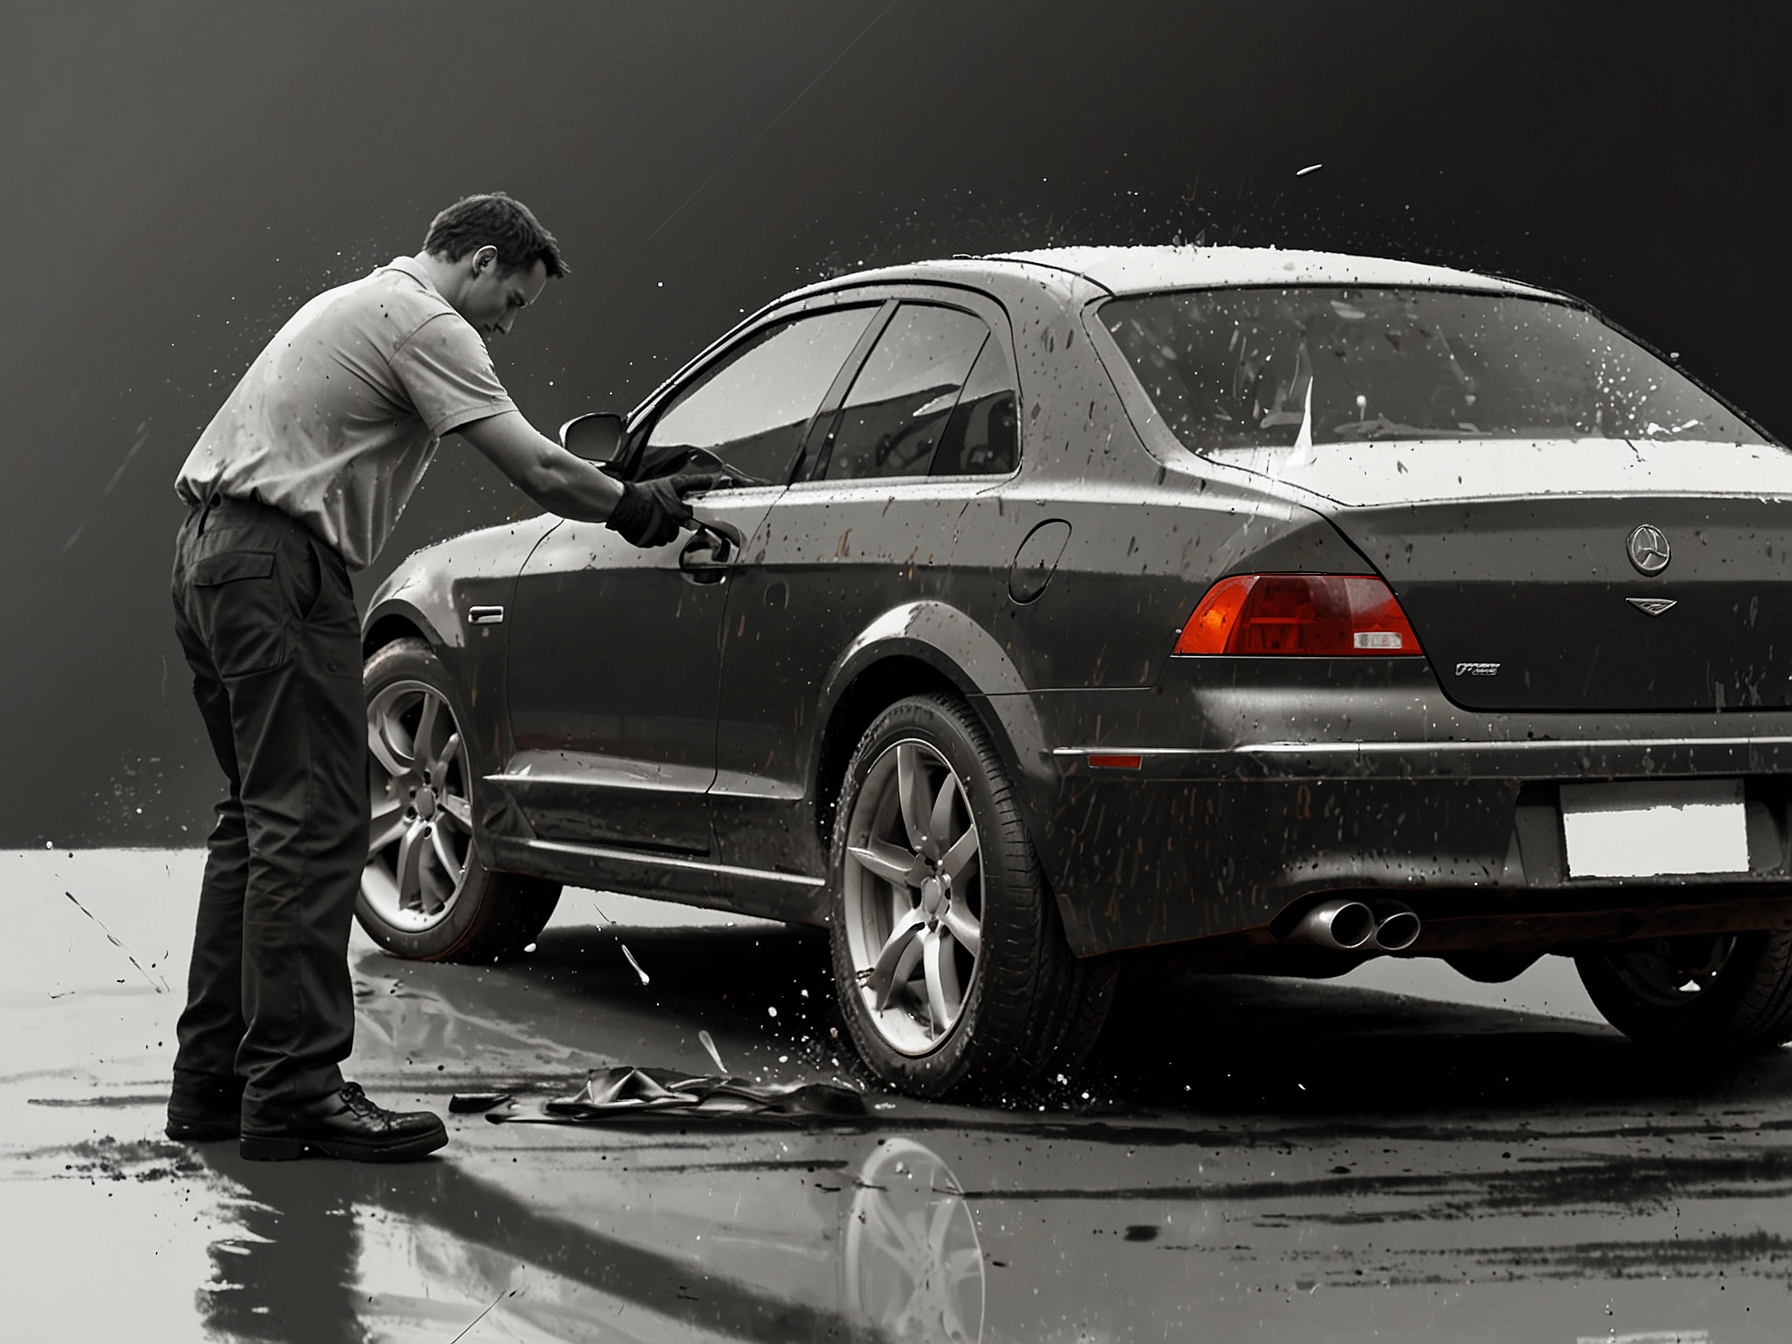 A person washing and waxing their car to prevent rust, highlighting the importance of regular cleaning to remove contaminants and protect the car's surface.